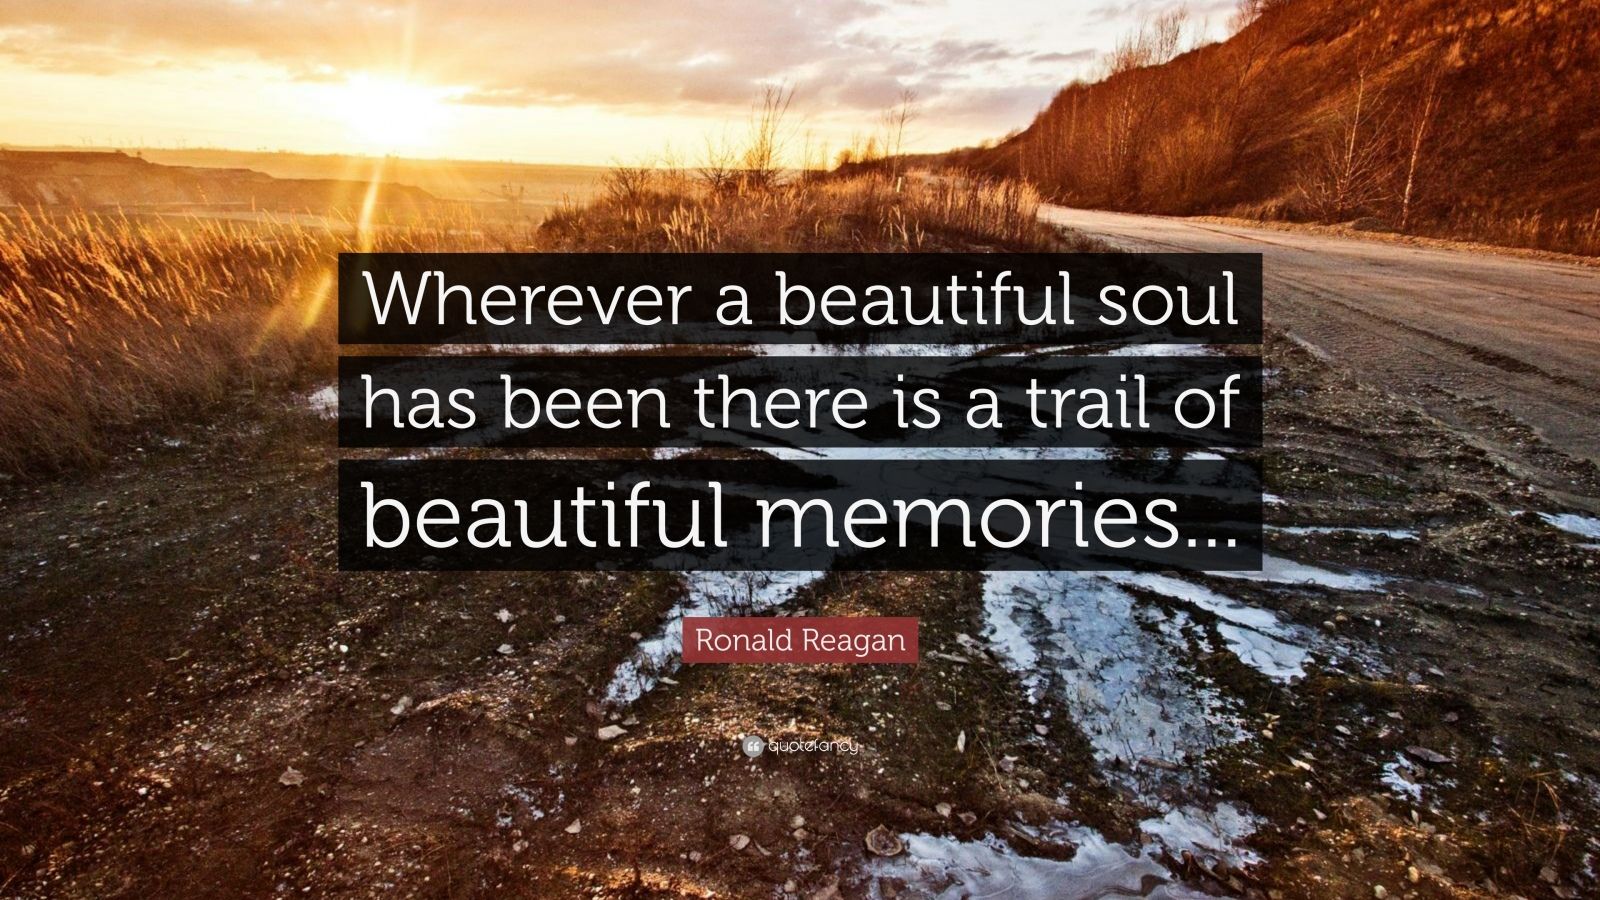 Ronald Reagan Quote: “Wherever a beautiful soul has been there is a